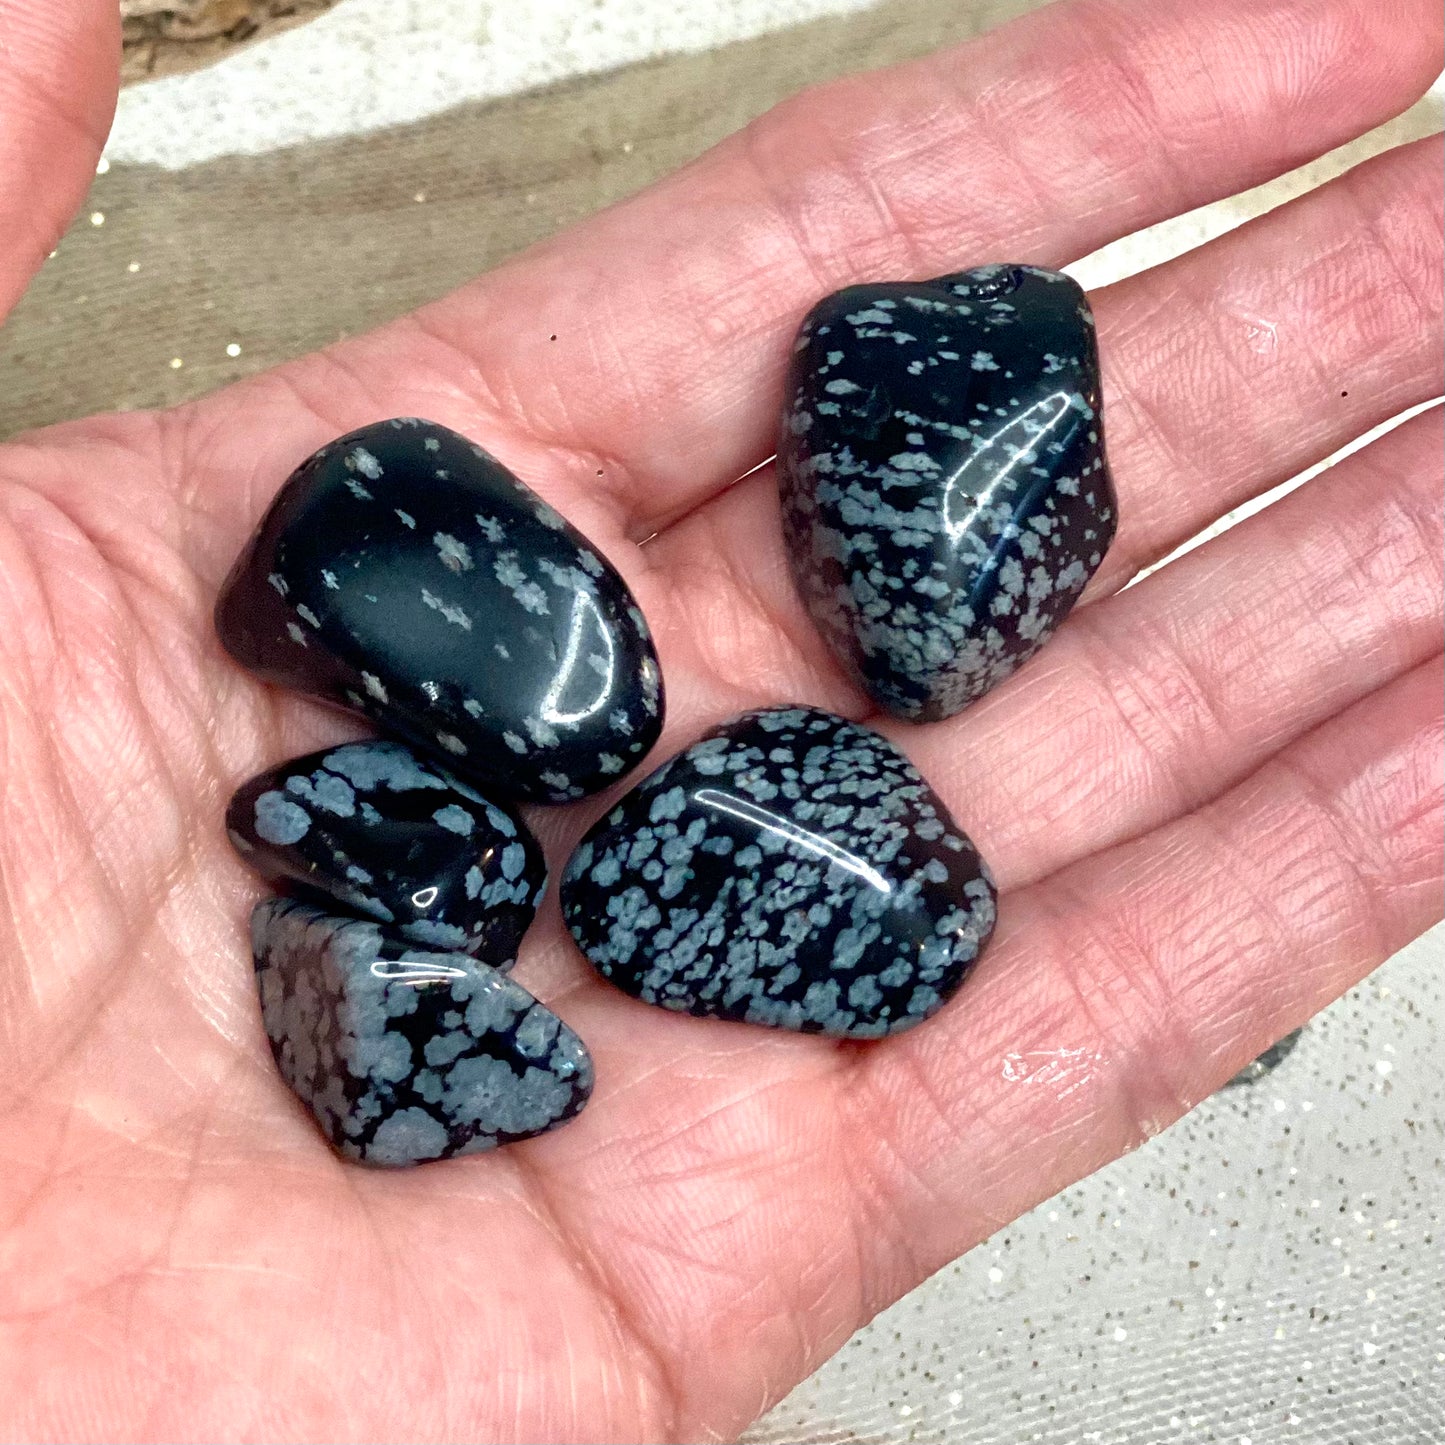 Snowflake Obsidian Tumbled: Grounding and Transformational Natural Gemstone